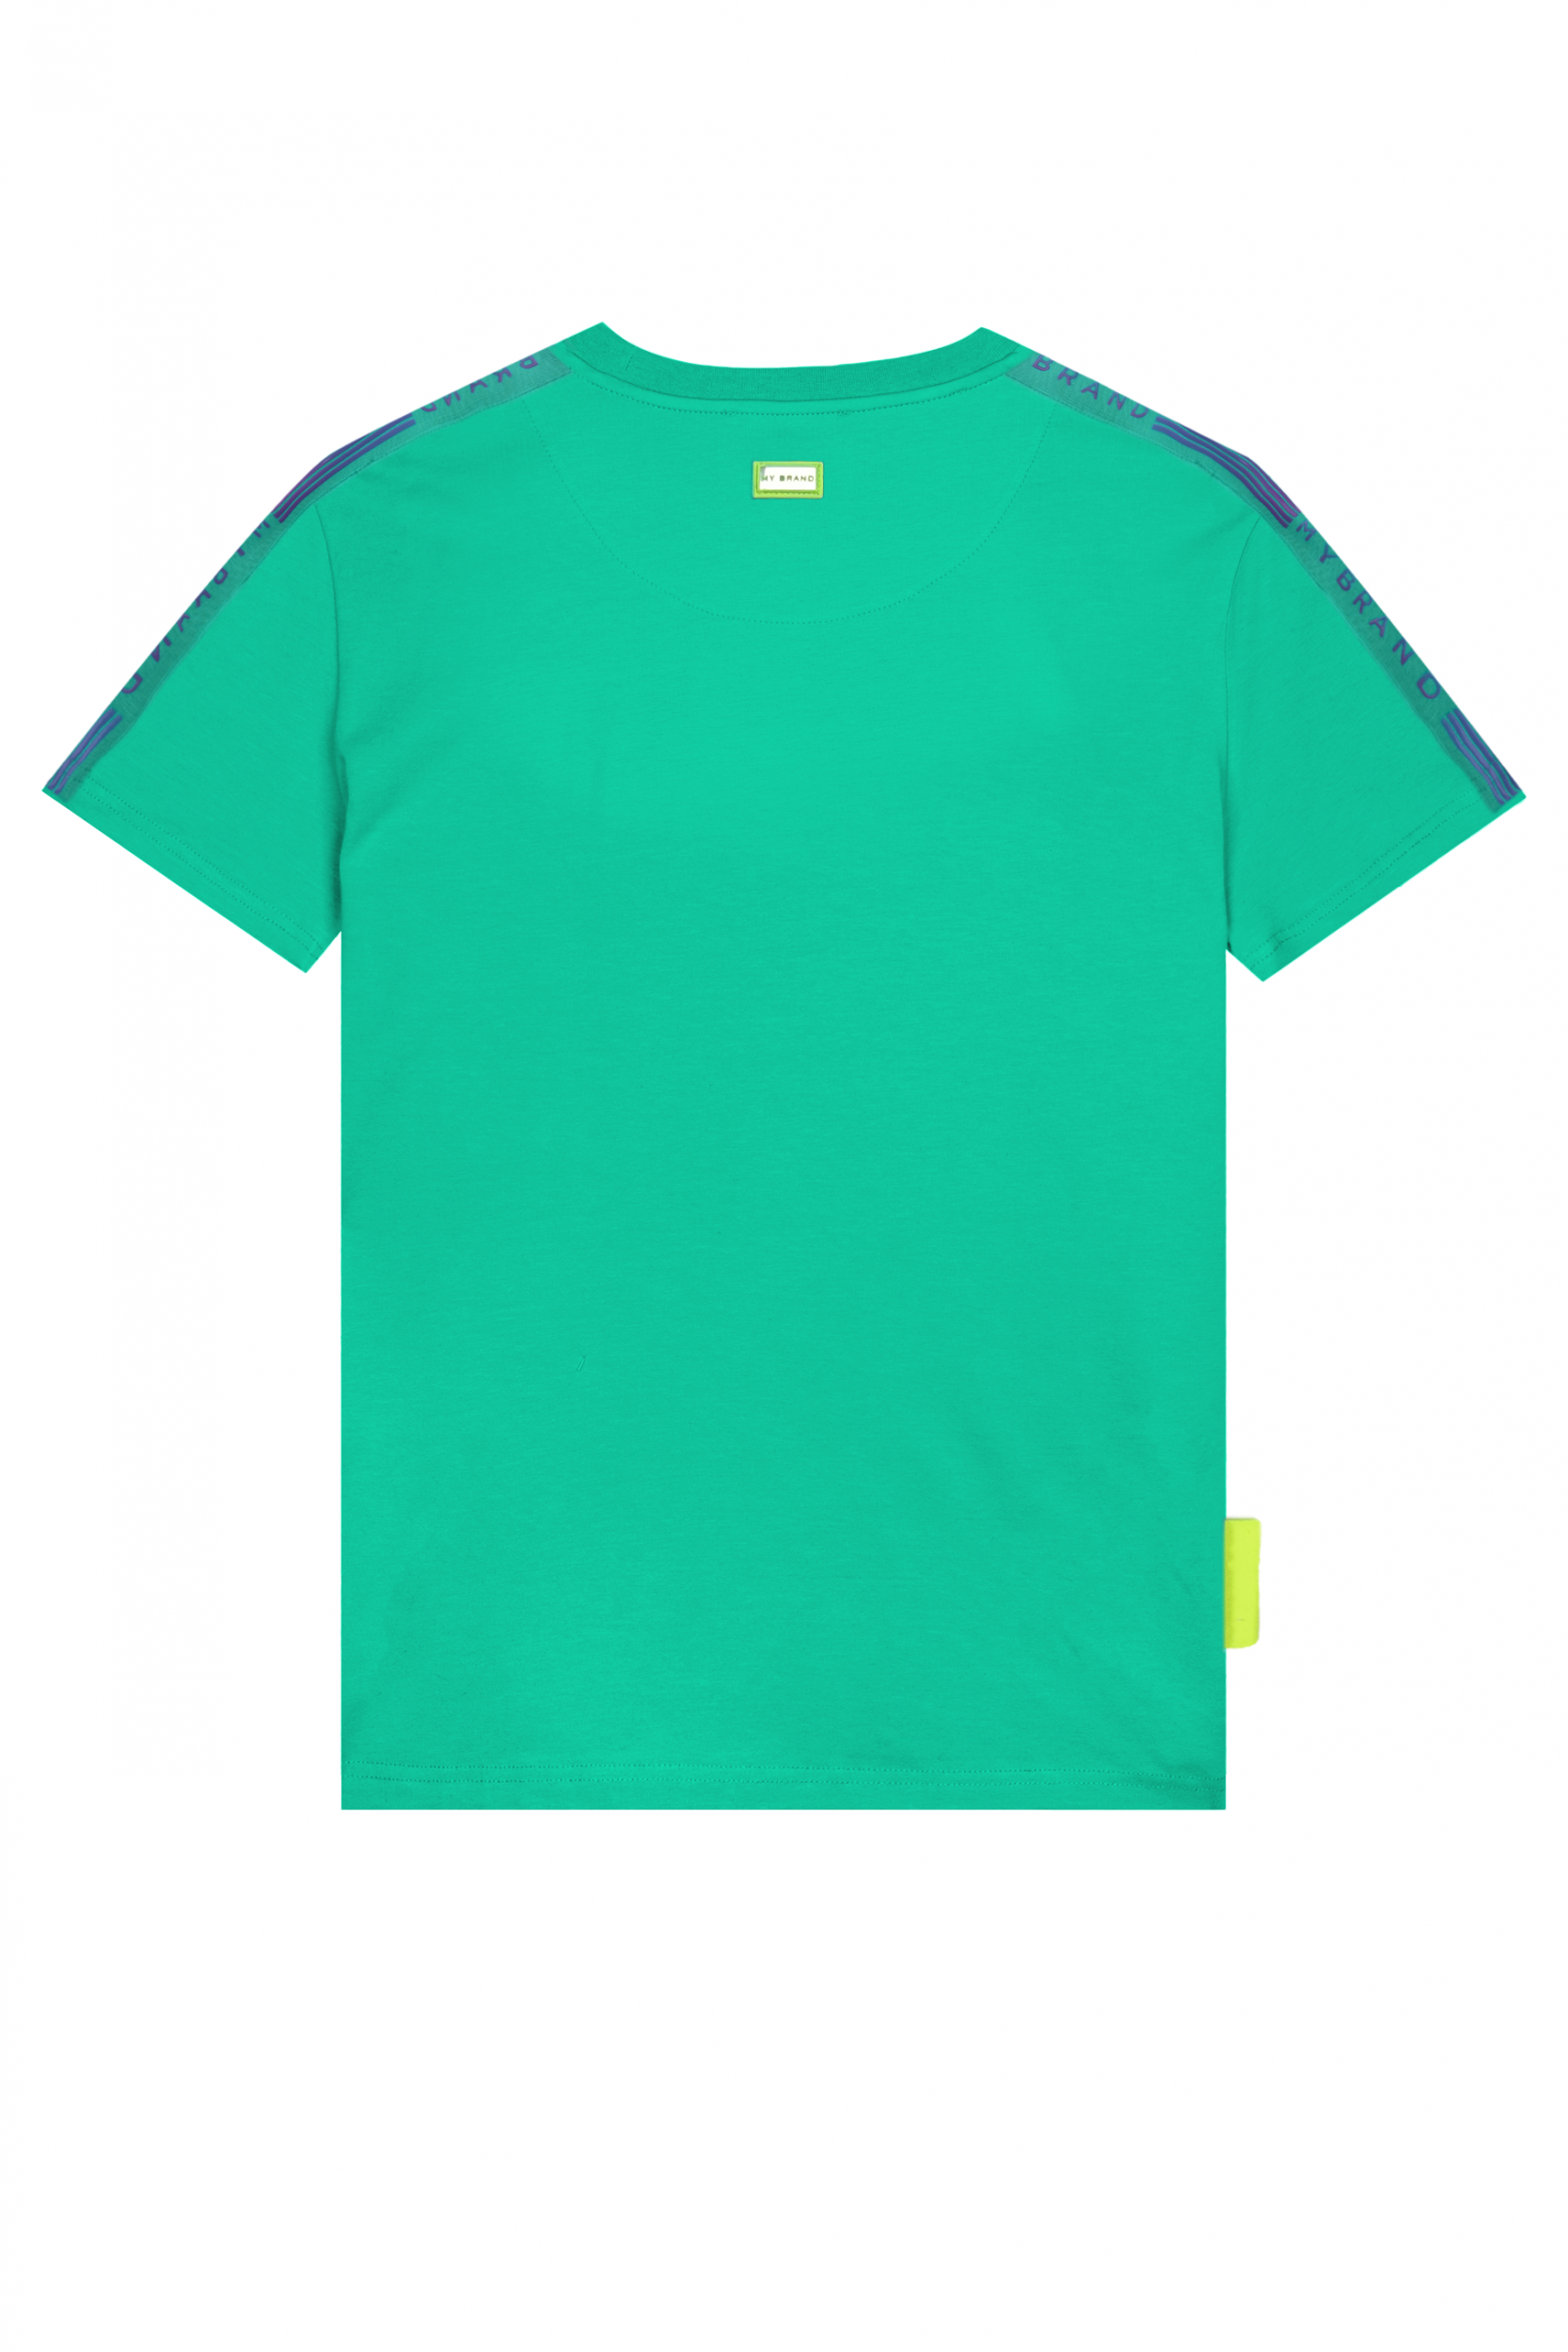 MB TAPING GRADIENT T-SHIR | TURQUOISE